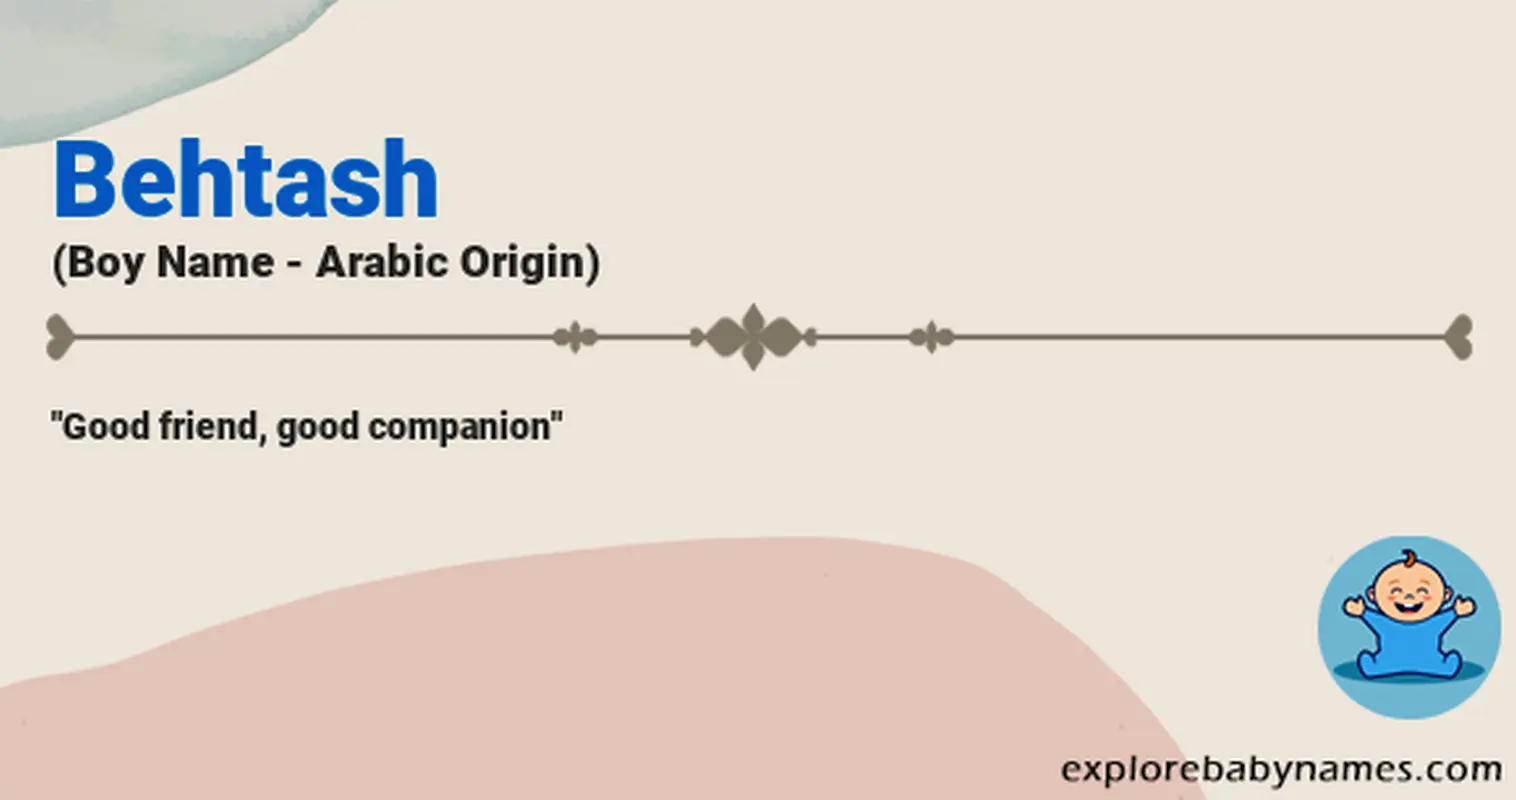 Meaning of Behtash